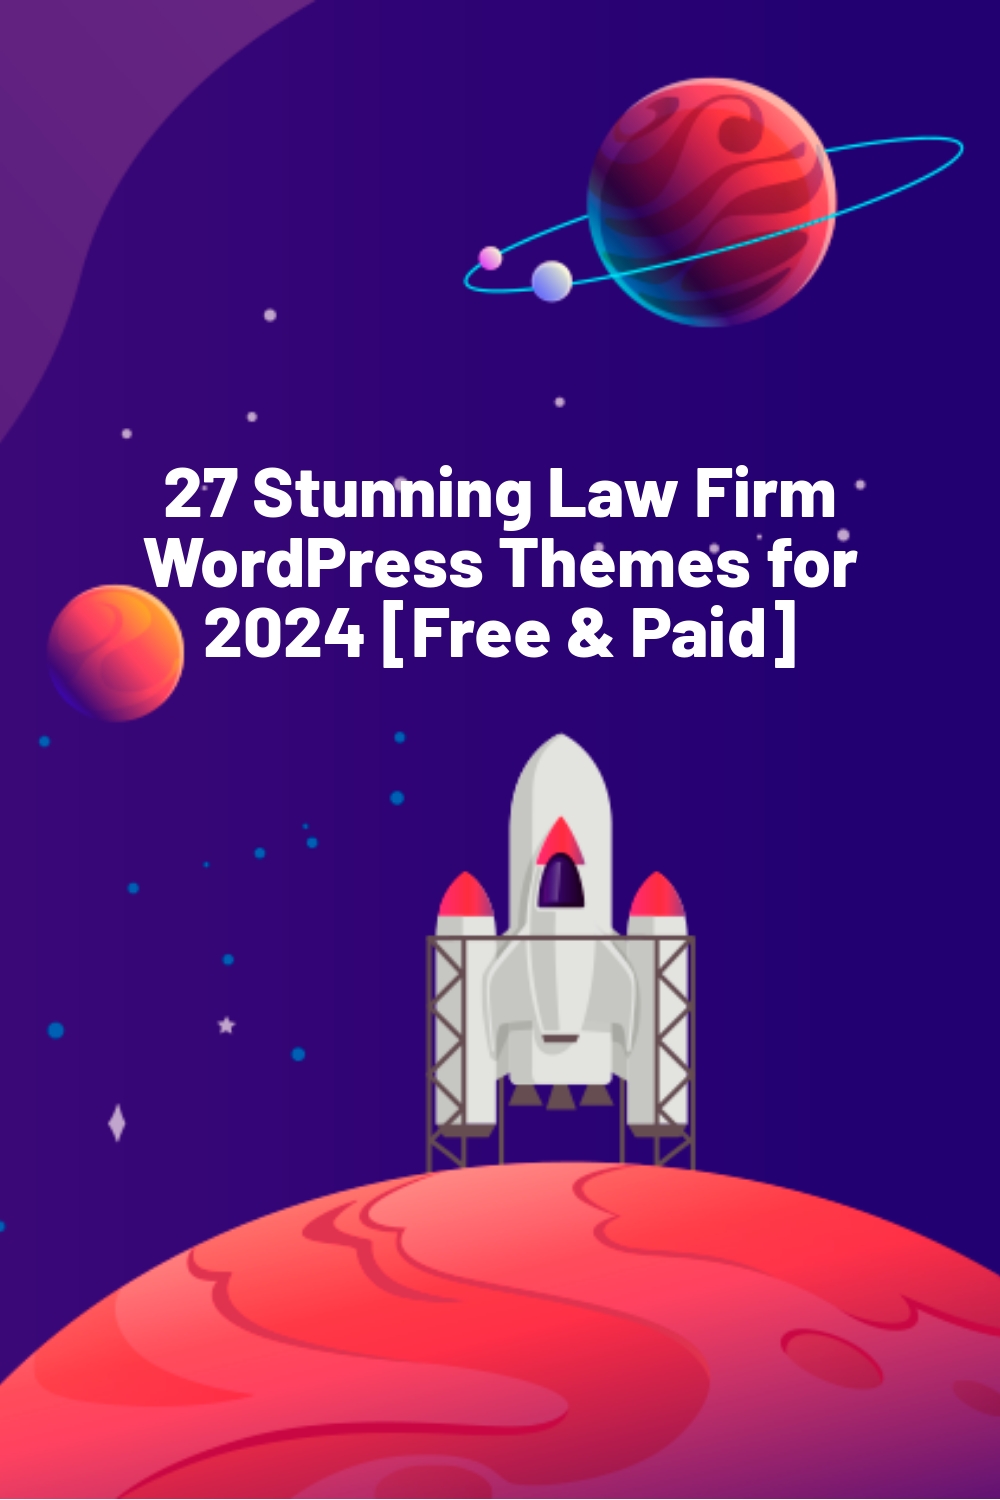 27 Stunning Law Firm WordPress Themes for 2024 [Free & Paid]